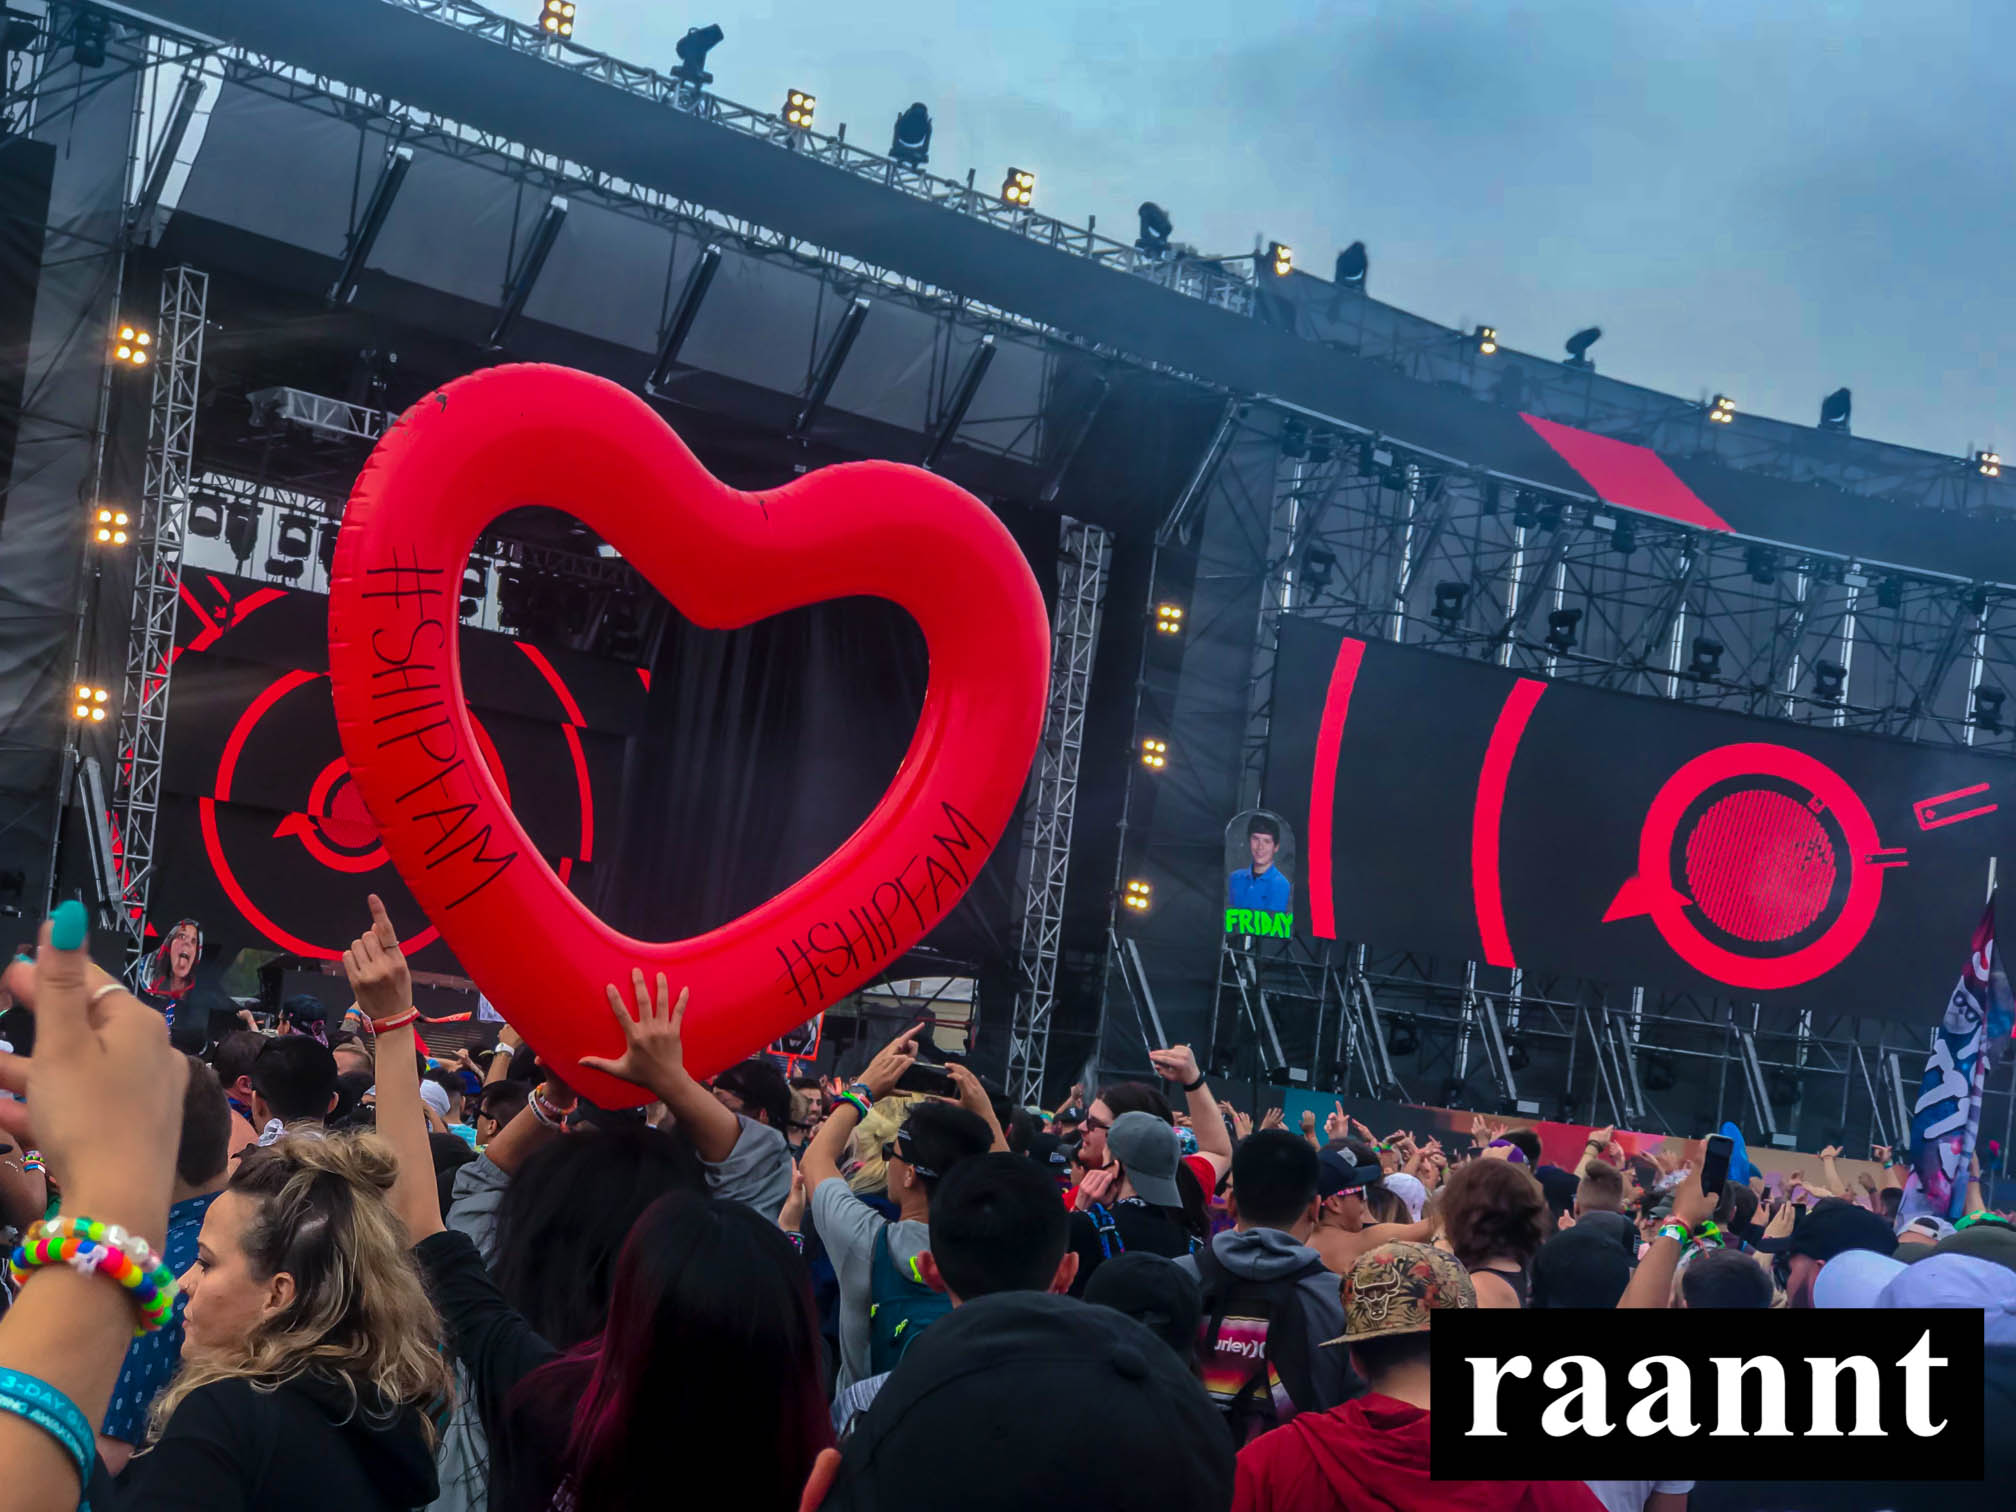 Spring Awakening Music Festival 2018 What does PLUR stand for? Peace, Love, Unity, Respect.